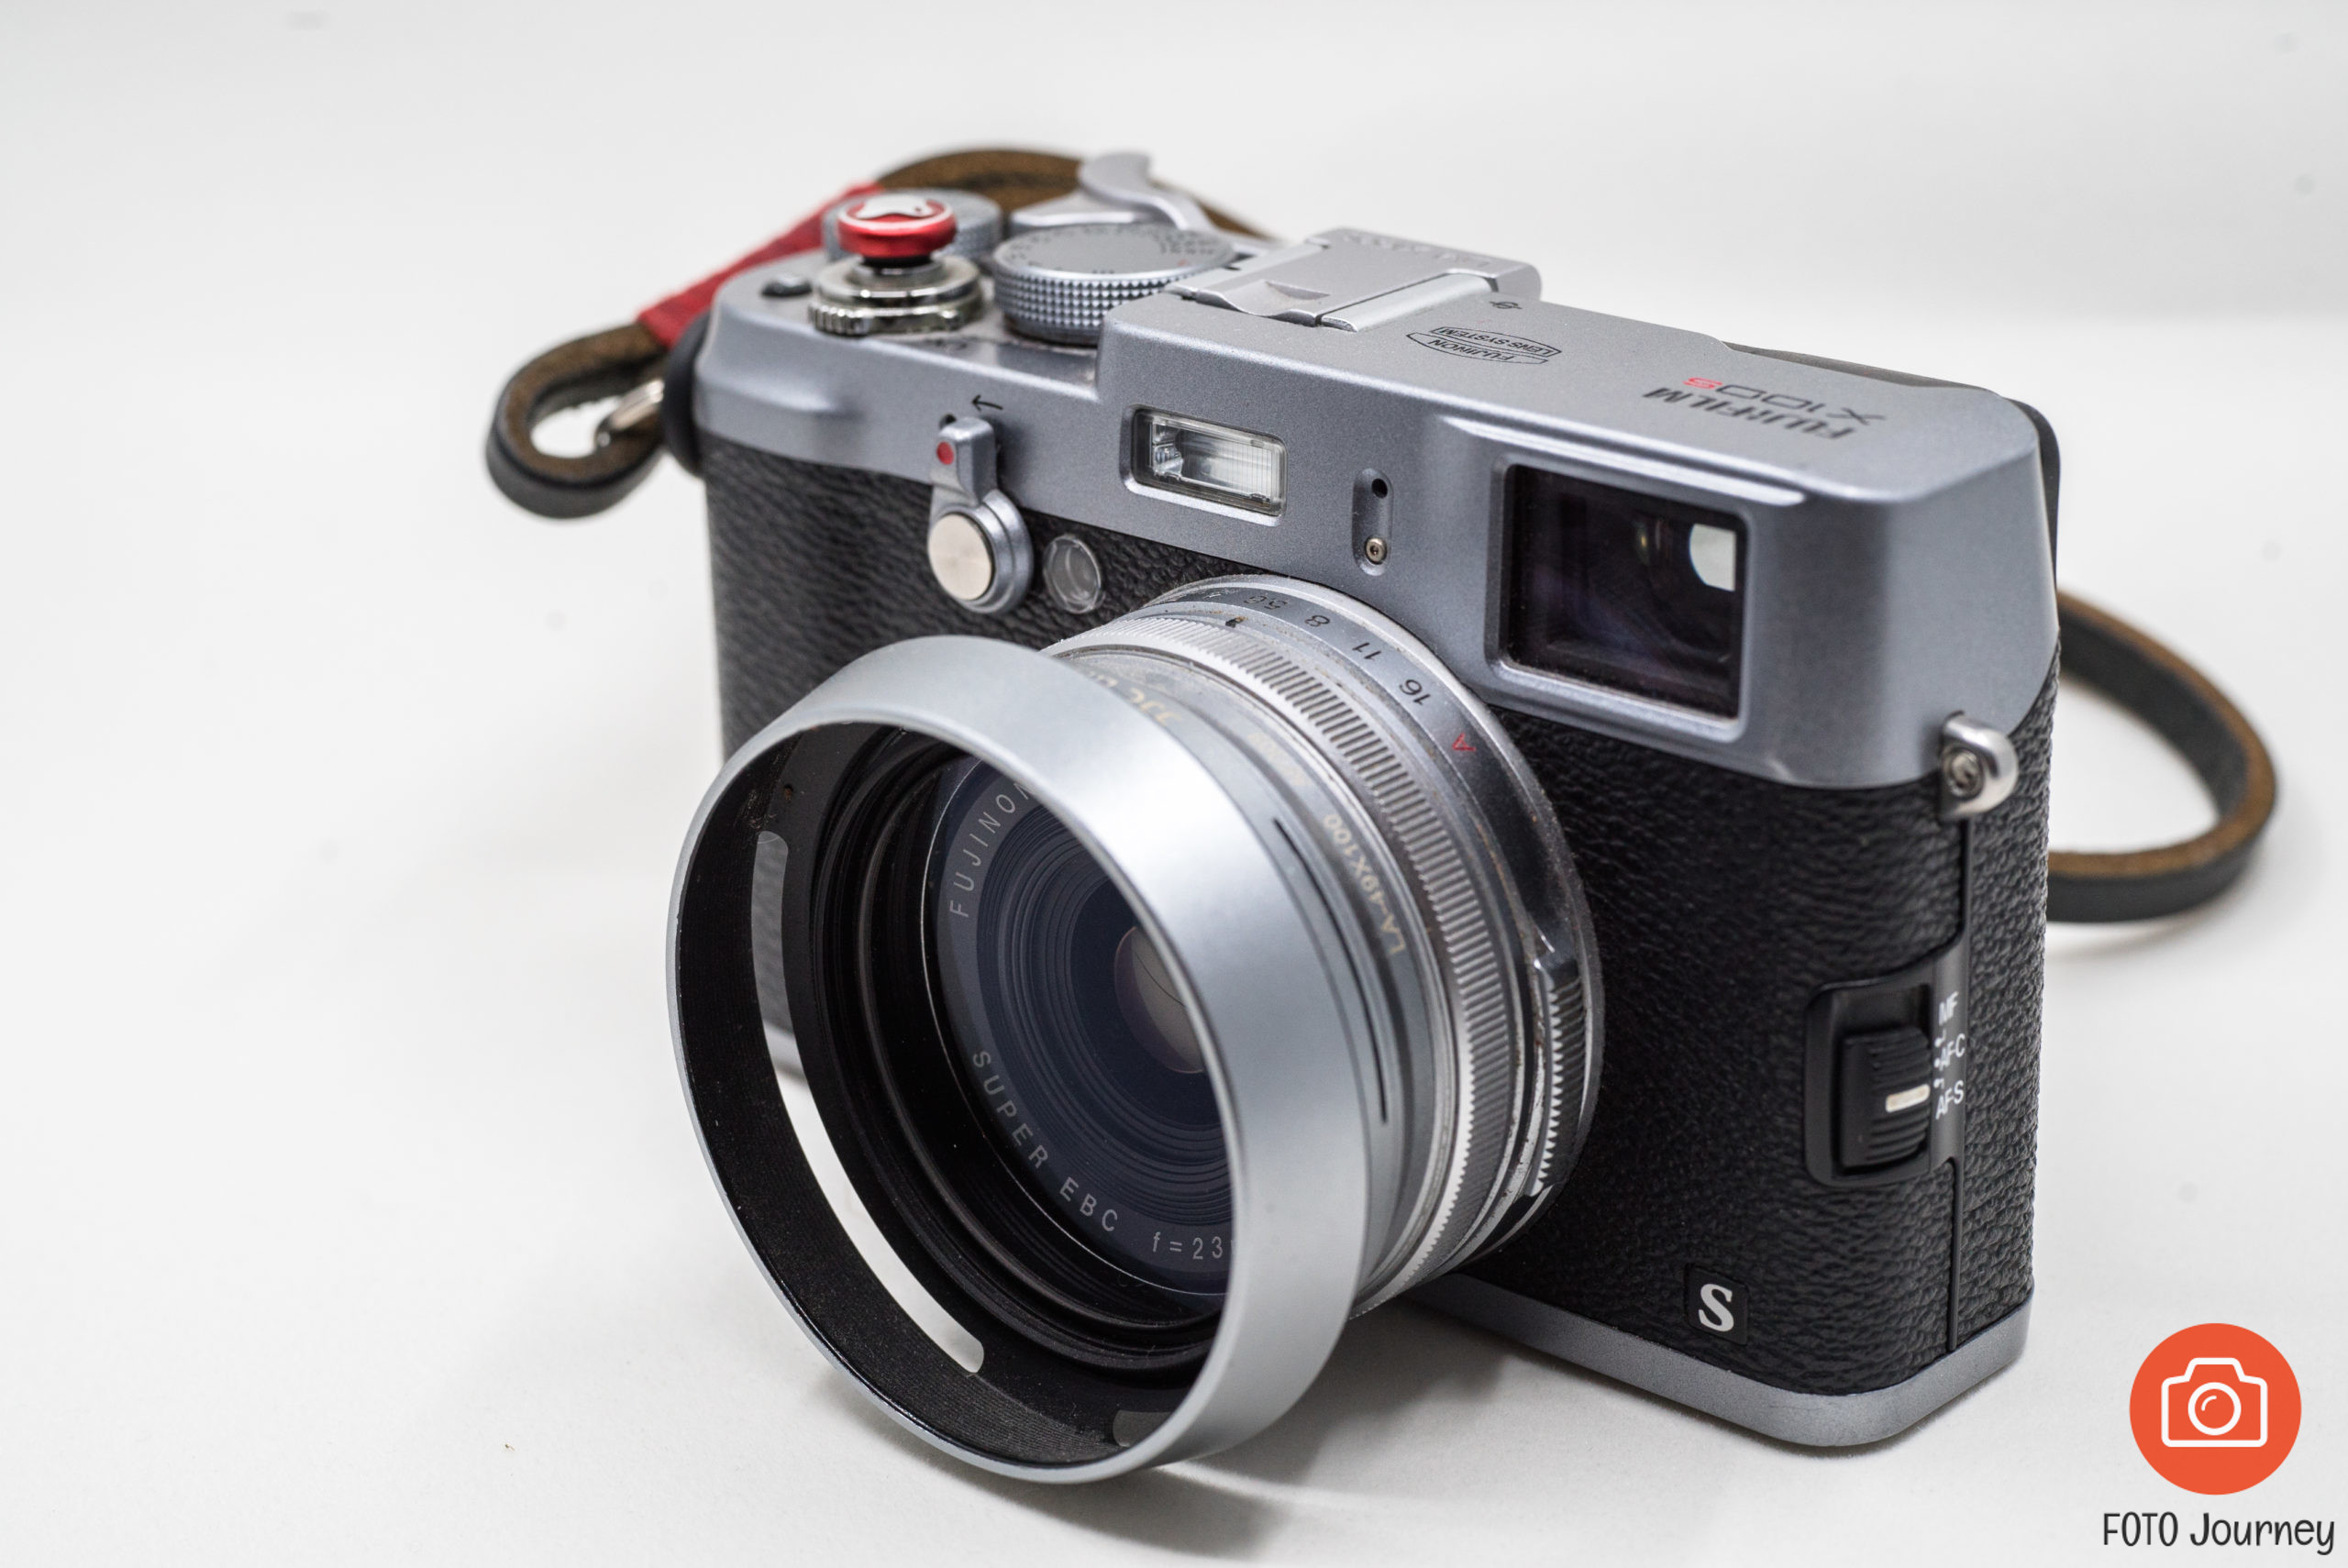 10 Shooting the Fuji X100s, my beloved old camera - My Foto Journey